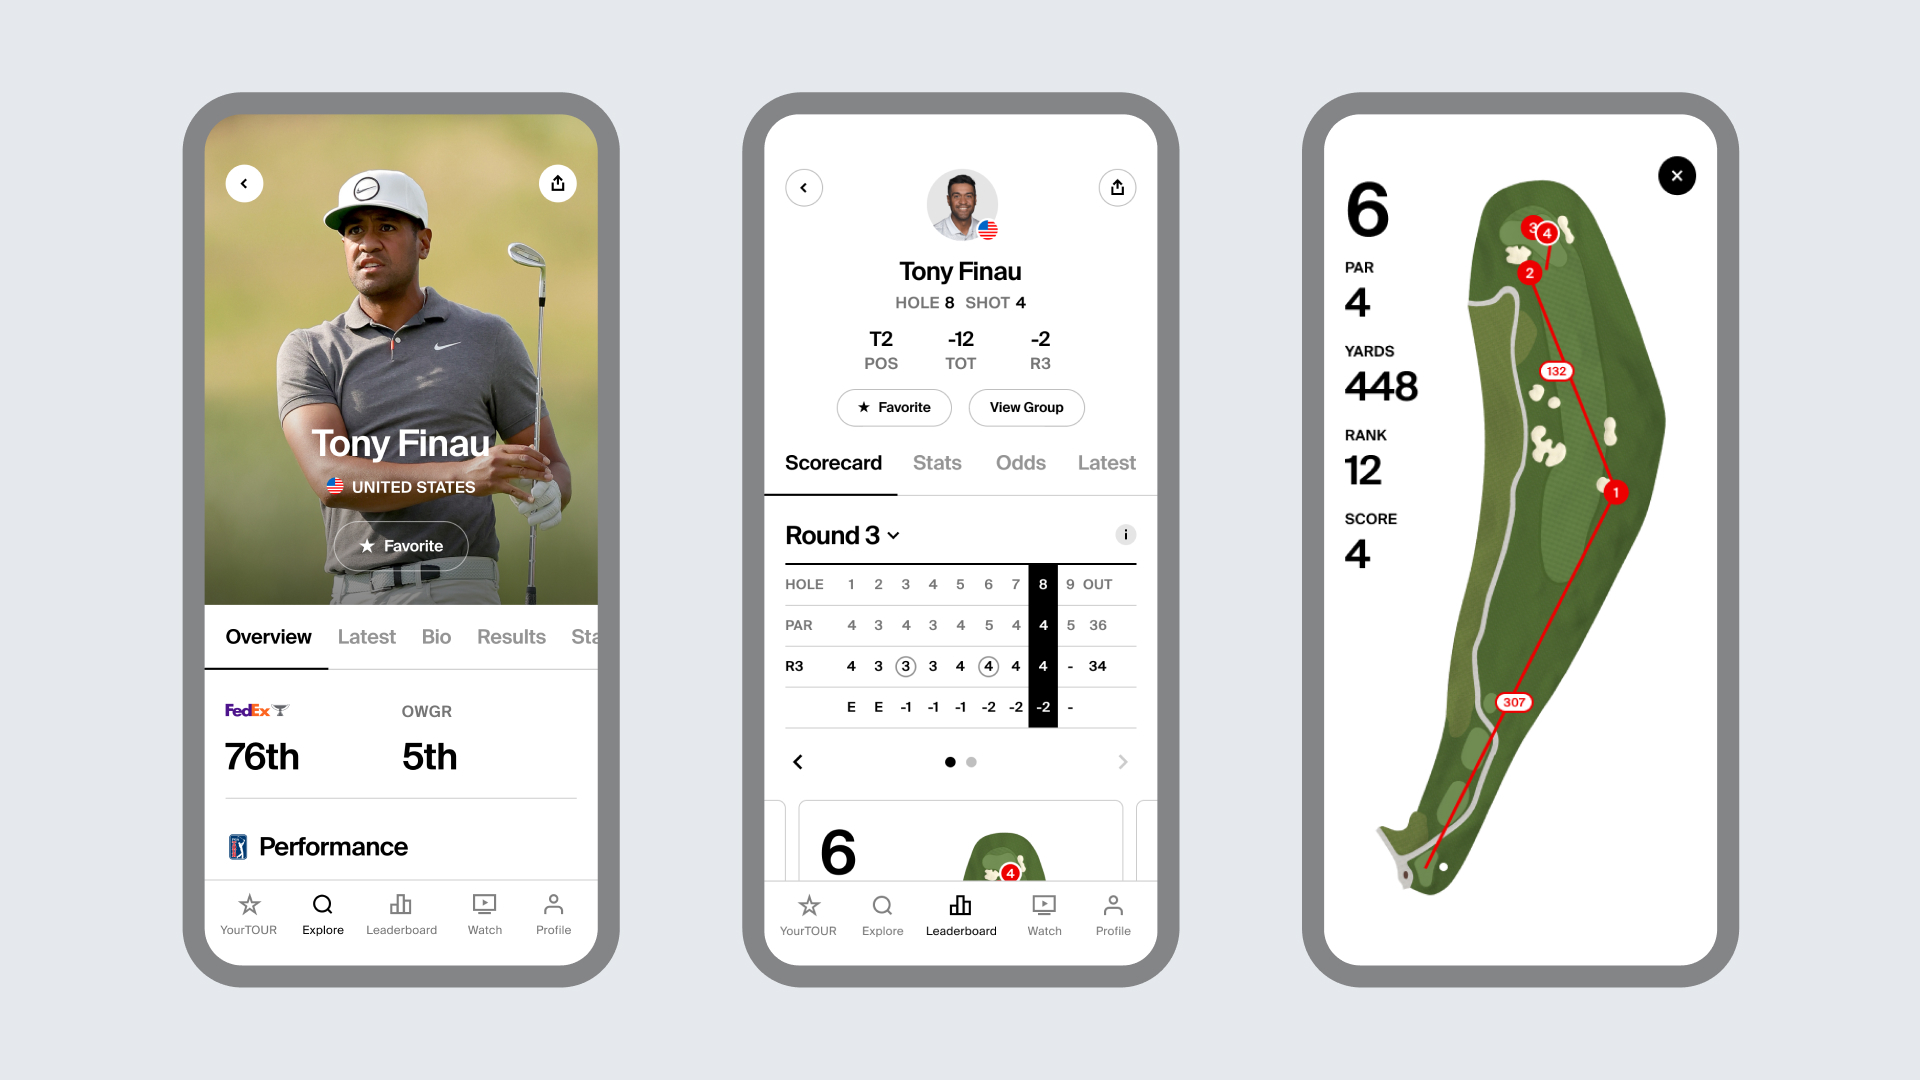 example images of PGA TOUR's new mobile experience